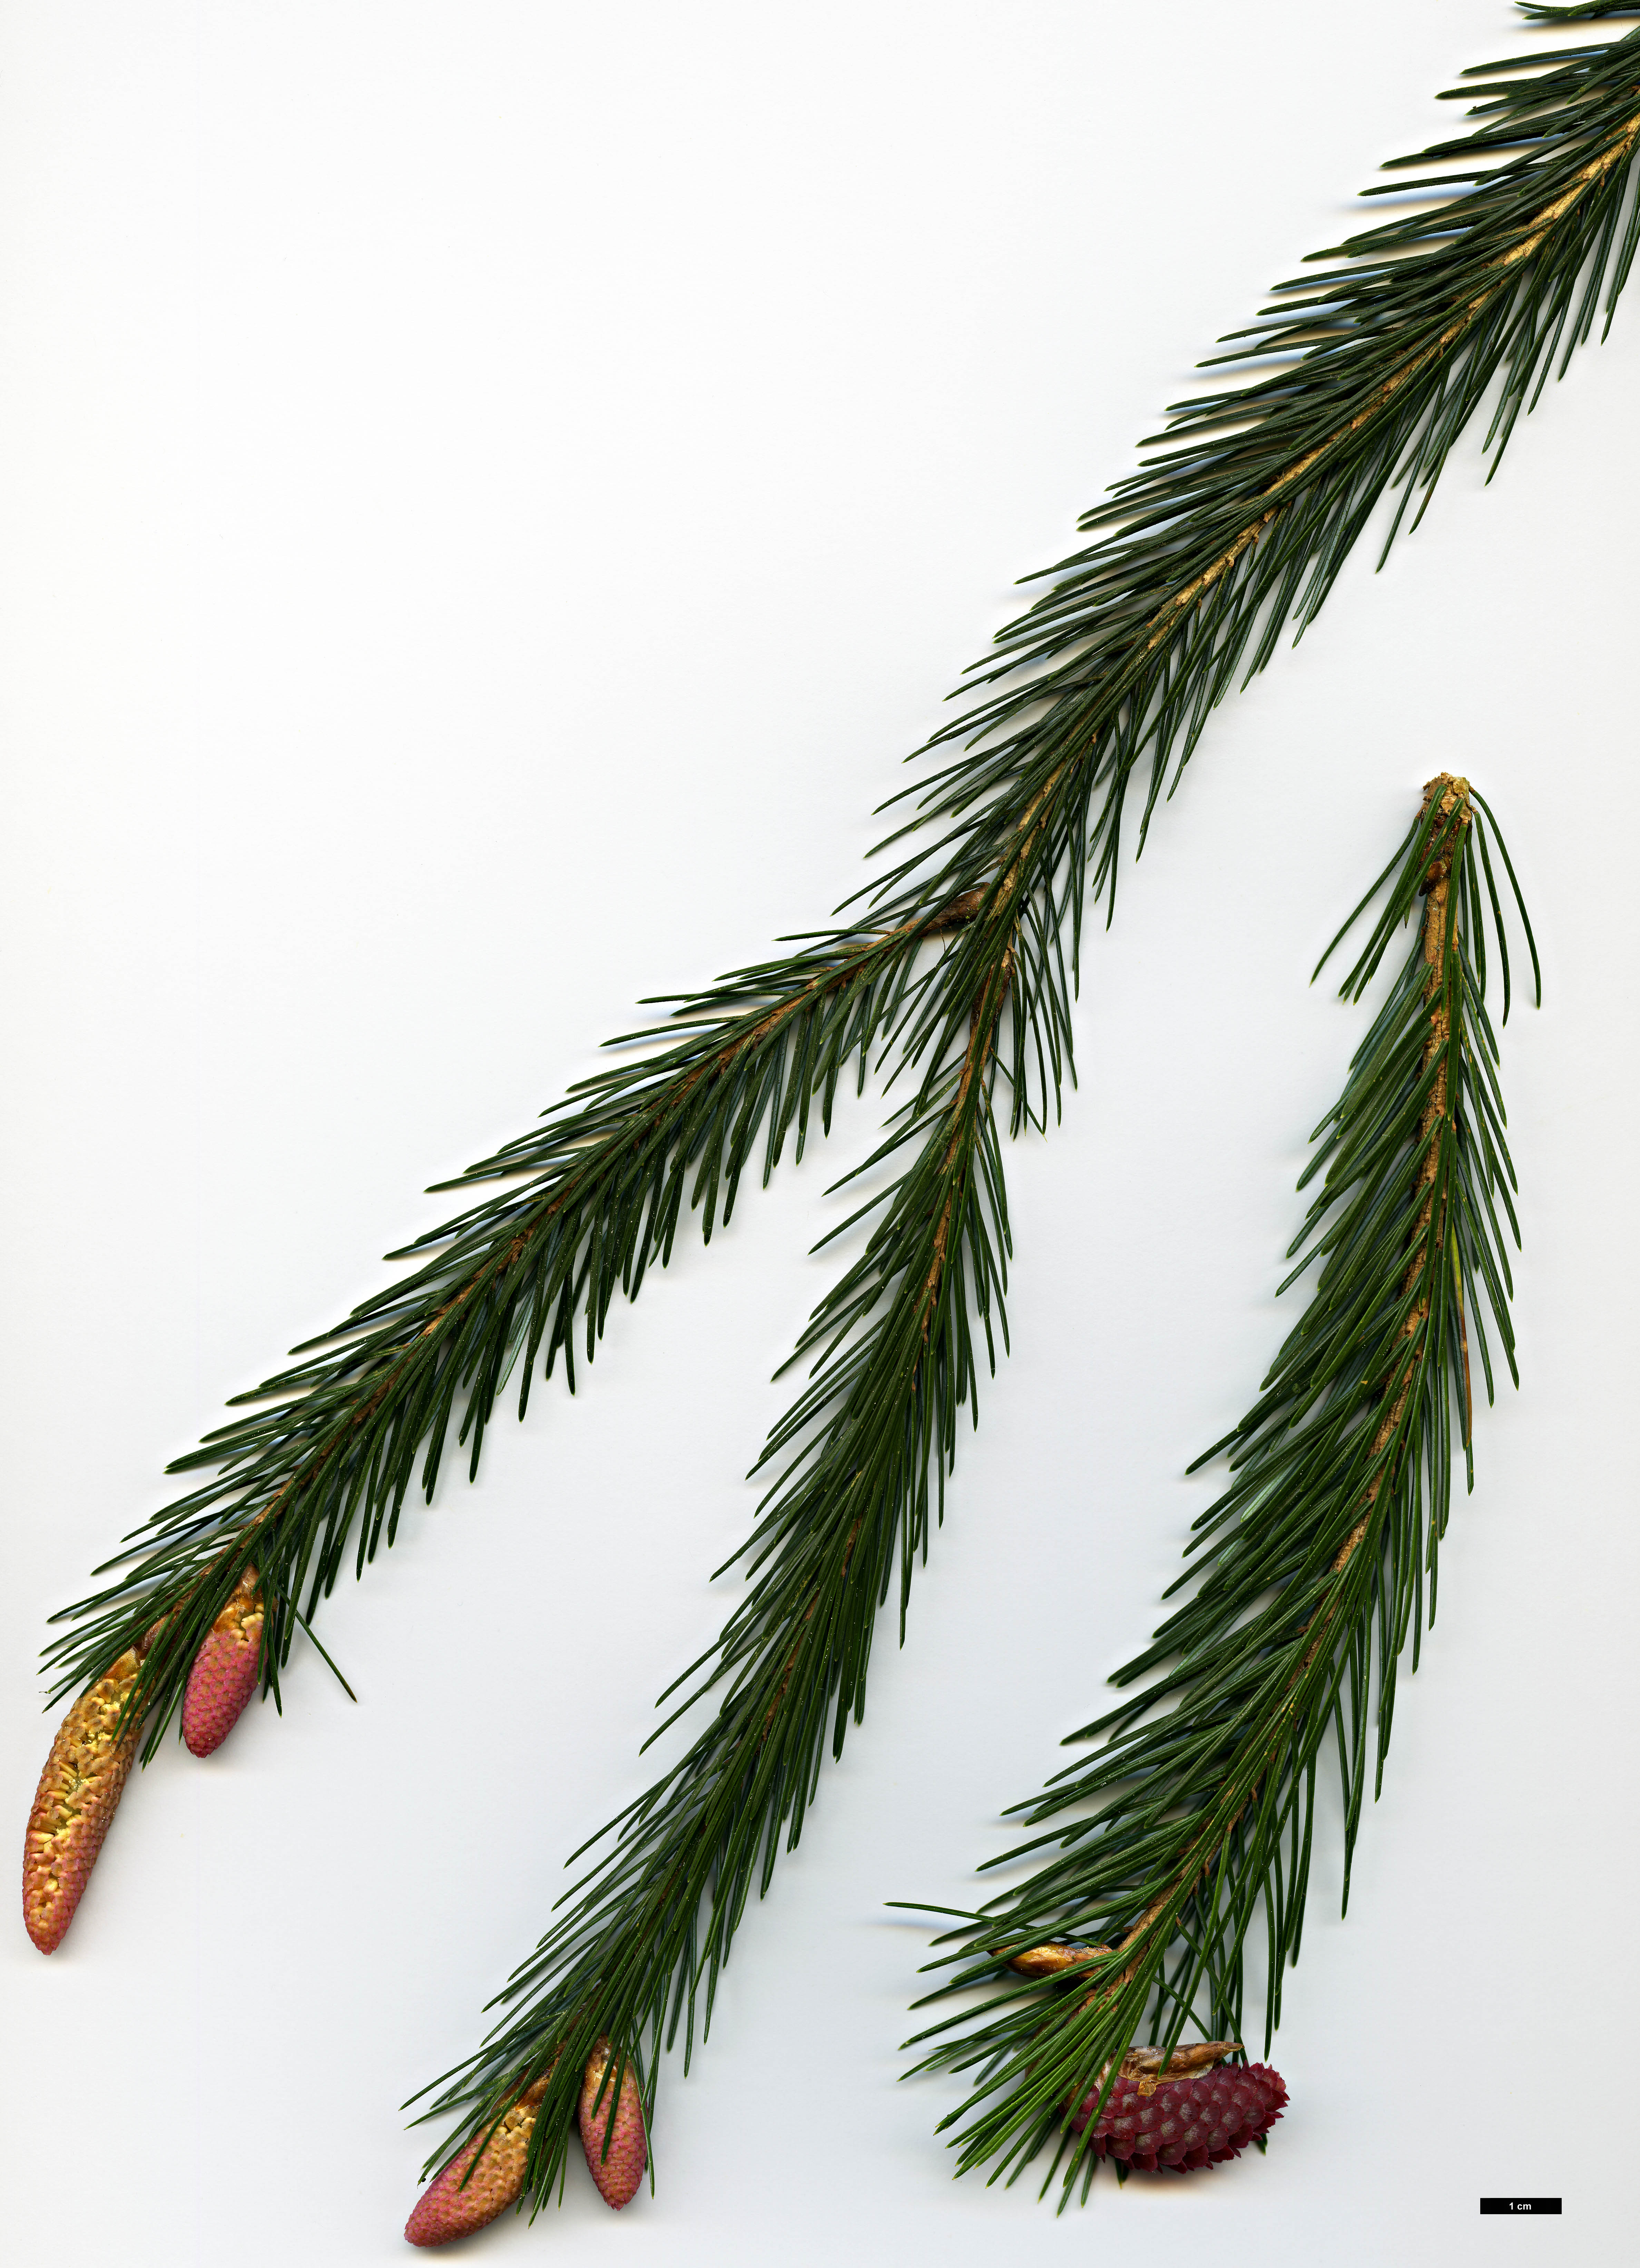 High resolution image: Family: Pinaceae - Genus: Picea - Taxon: spinulosa 